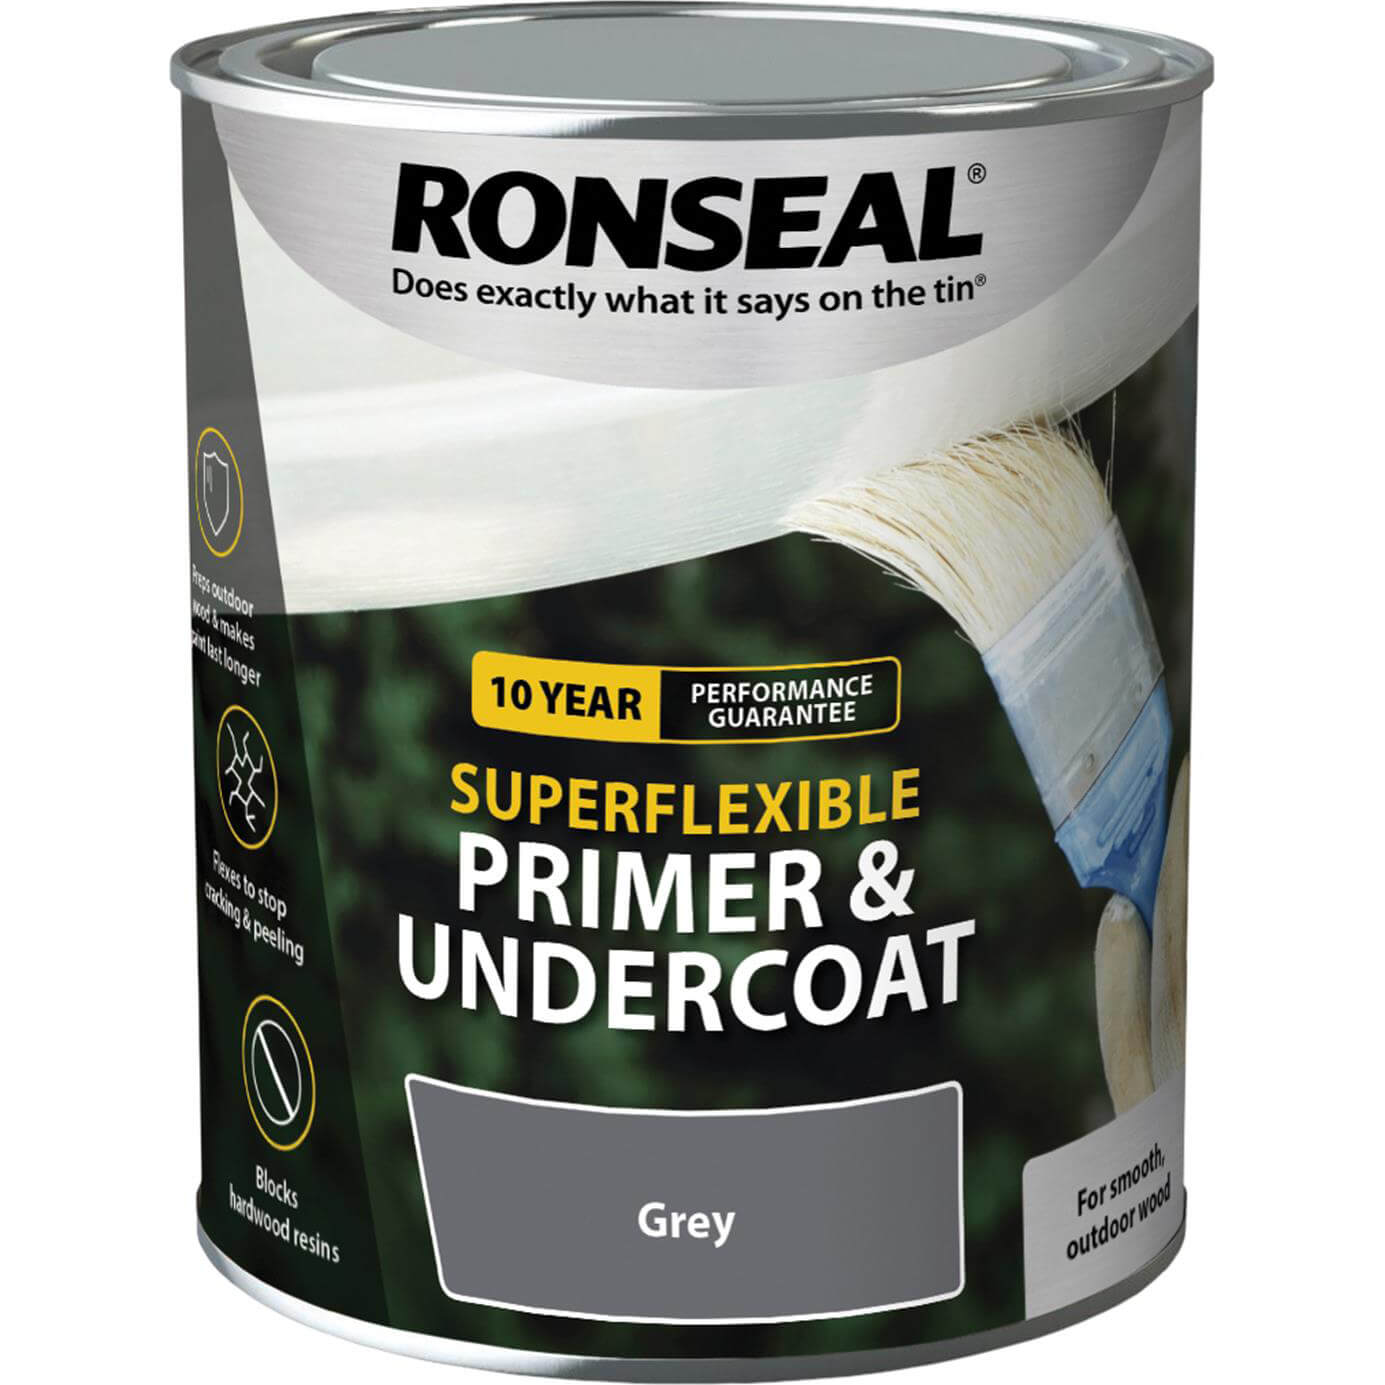 Image of Ronseal Super Flexible Wood Primer and Undercoat Grey 750ml